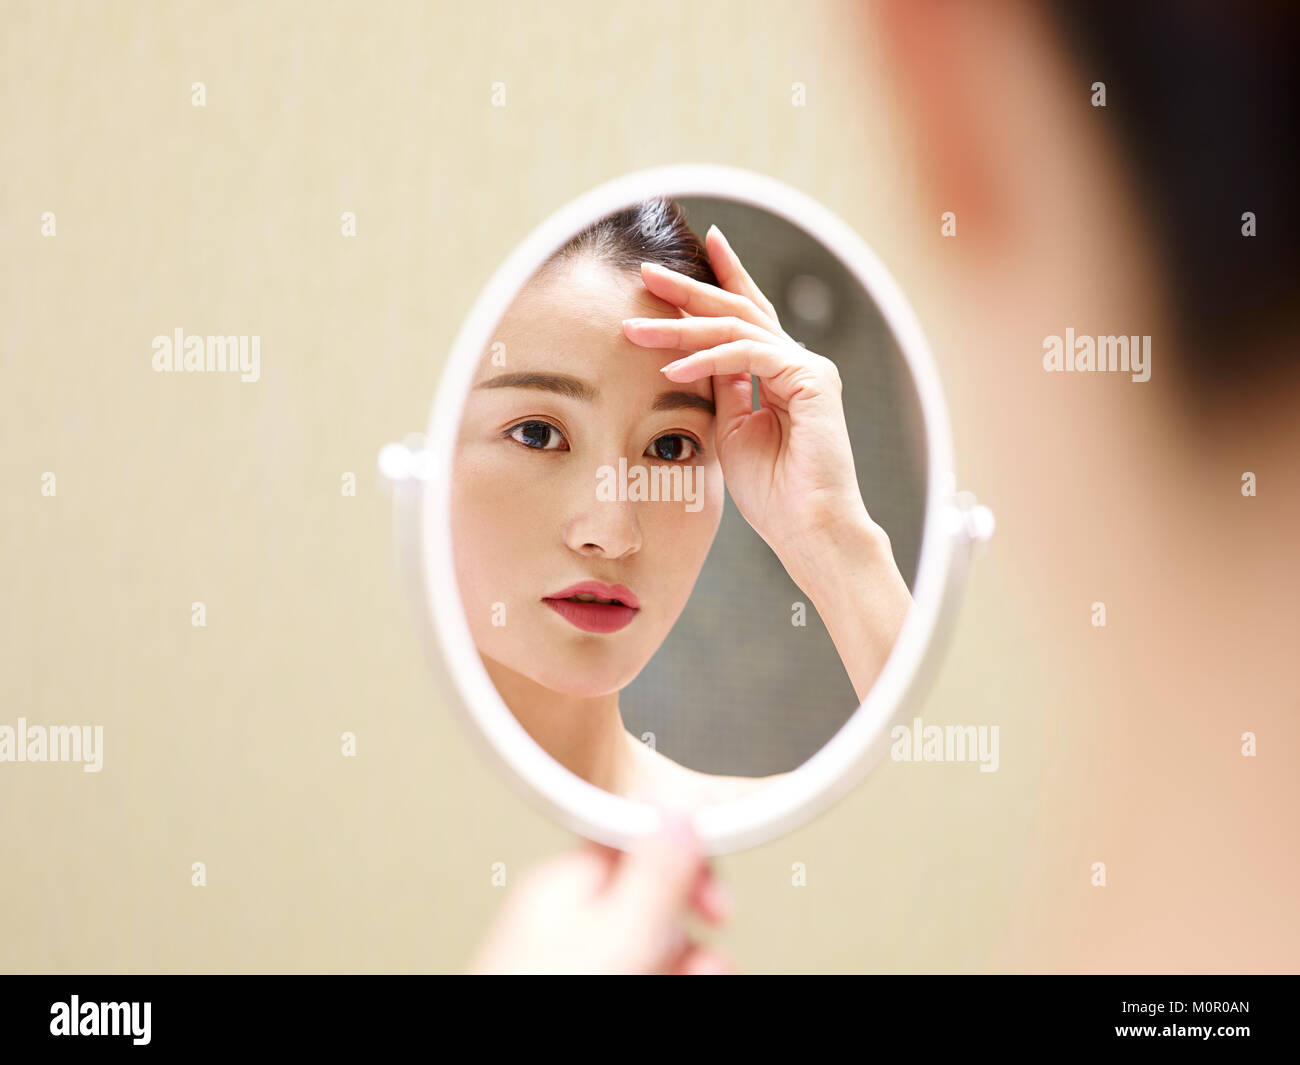 beautiful young asian woman looking at self in mirror, hand on forehead. Stock Photo